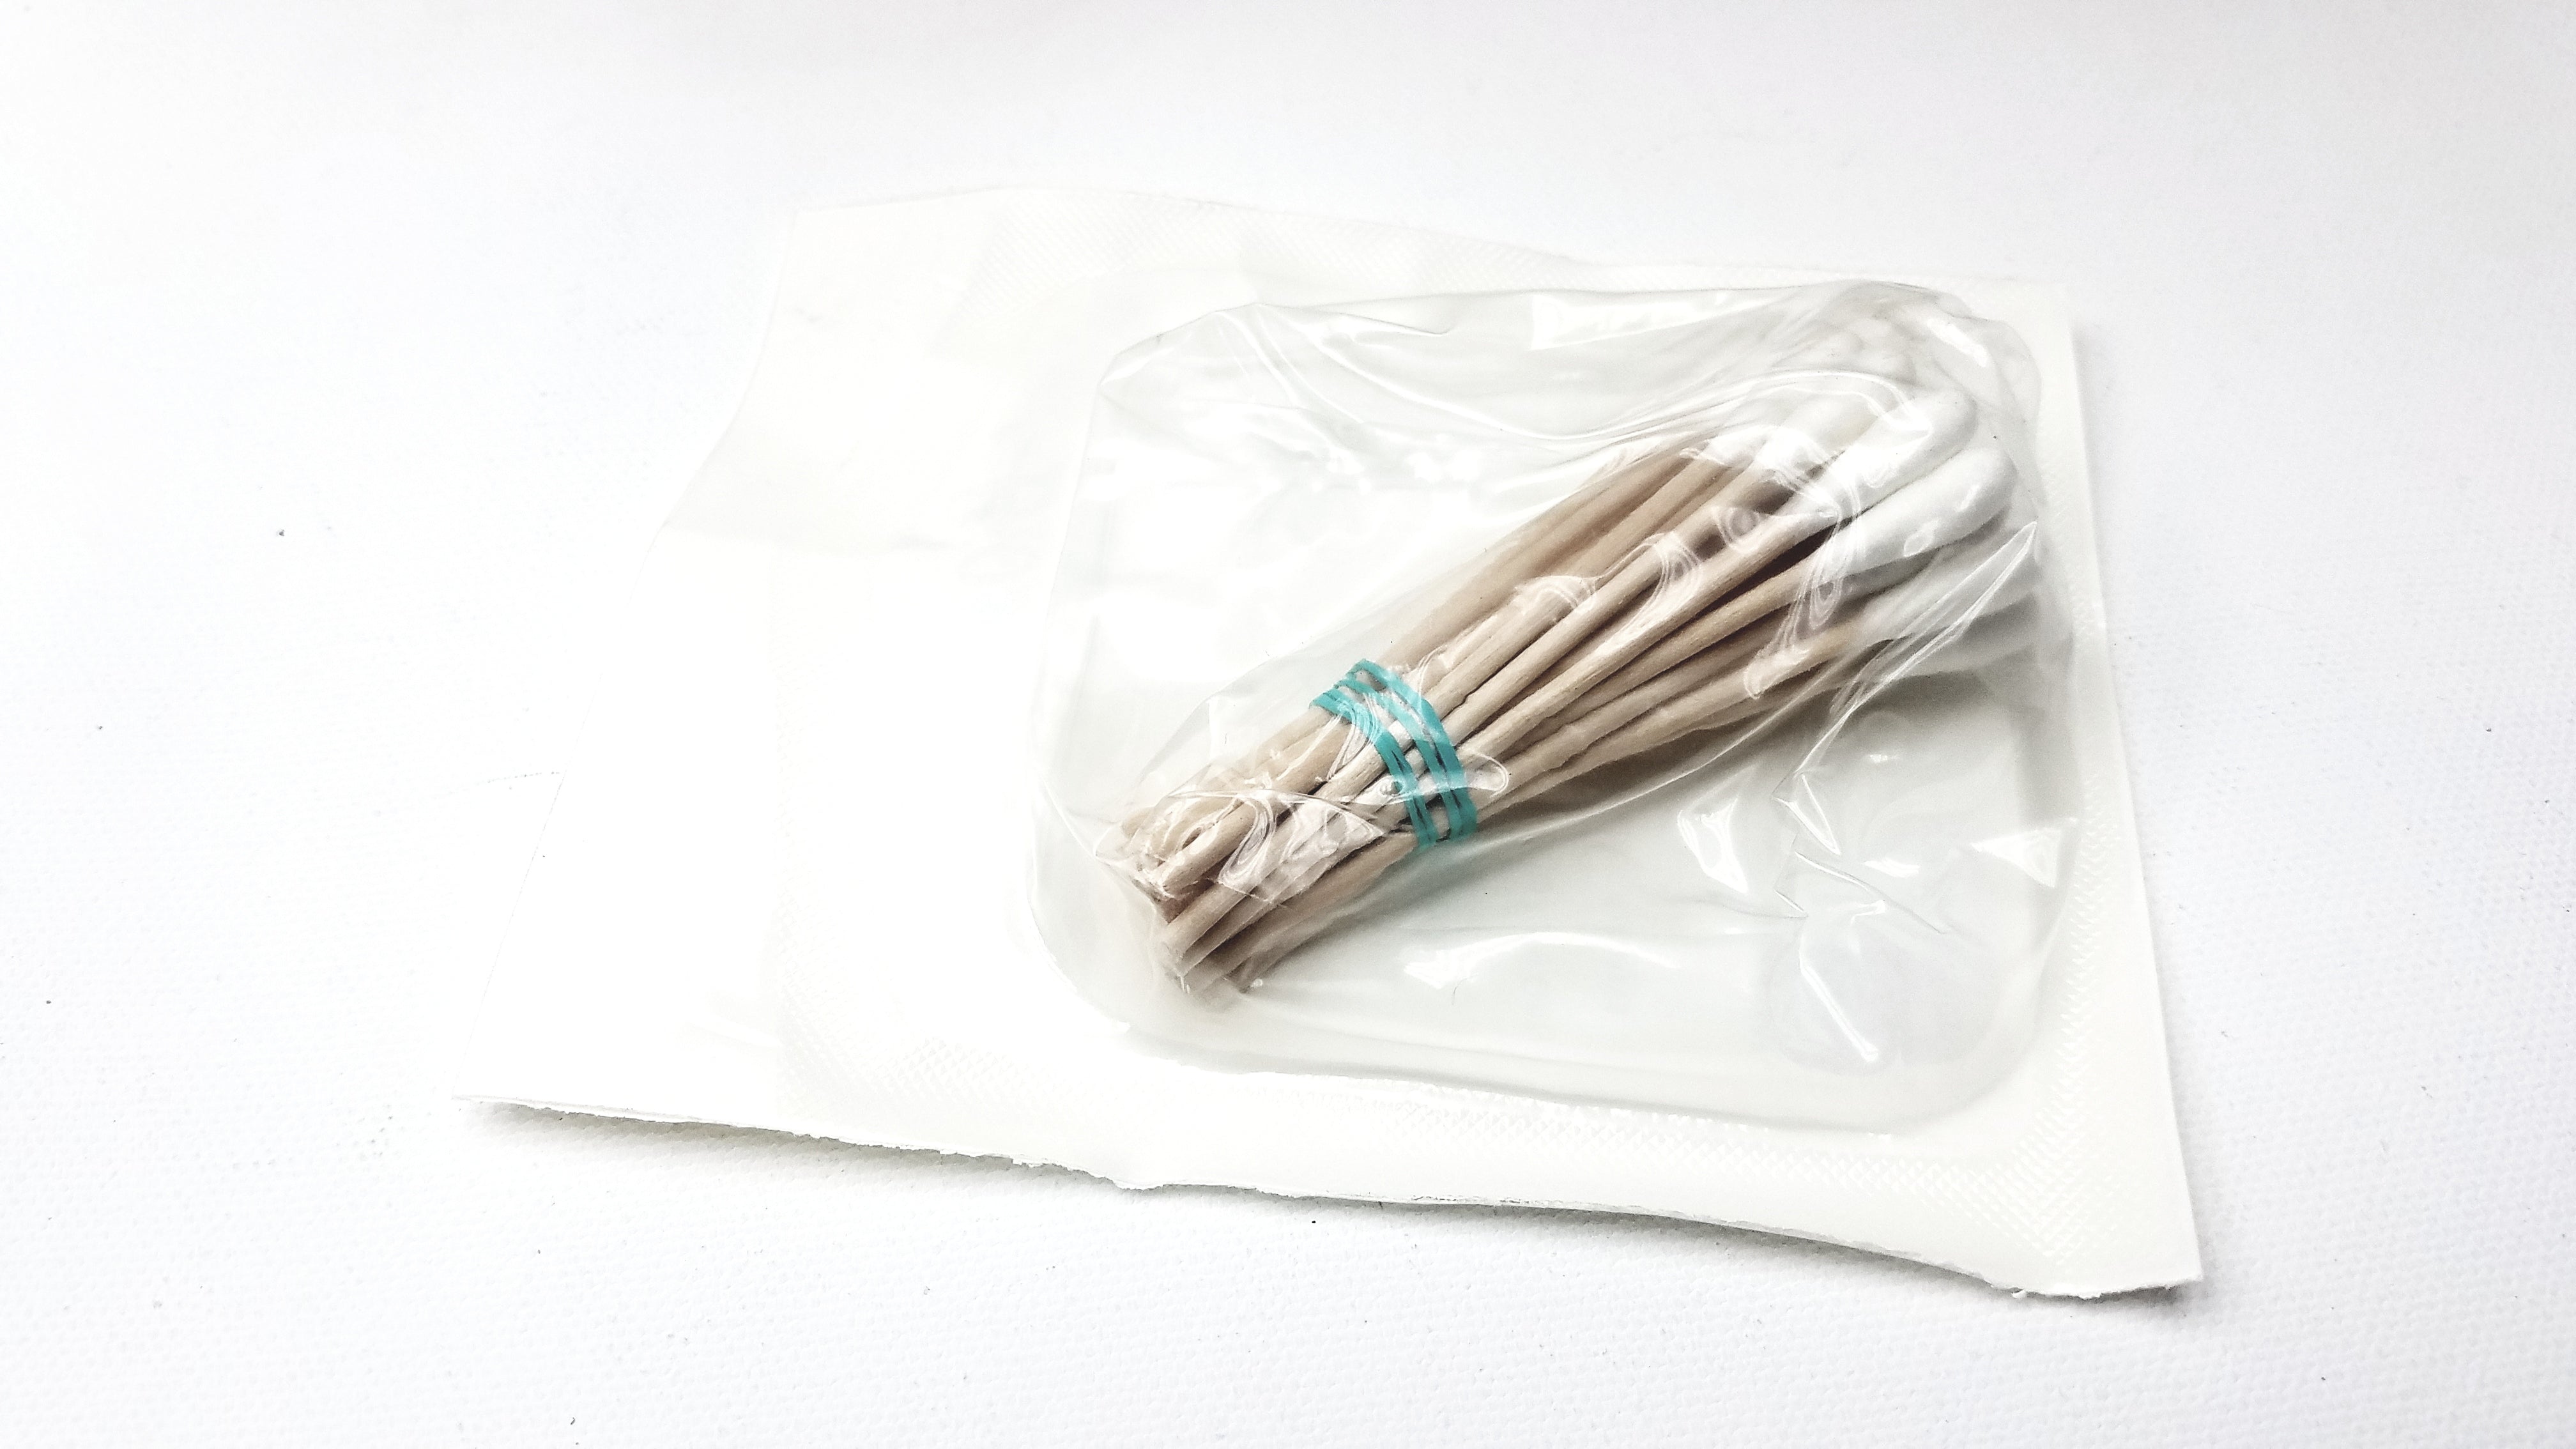 Load image into Gallery viewer, Bioseal Cotton Tip Applicators 9325/100